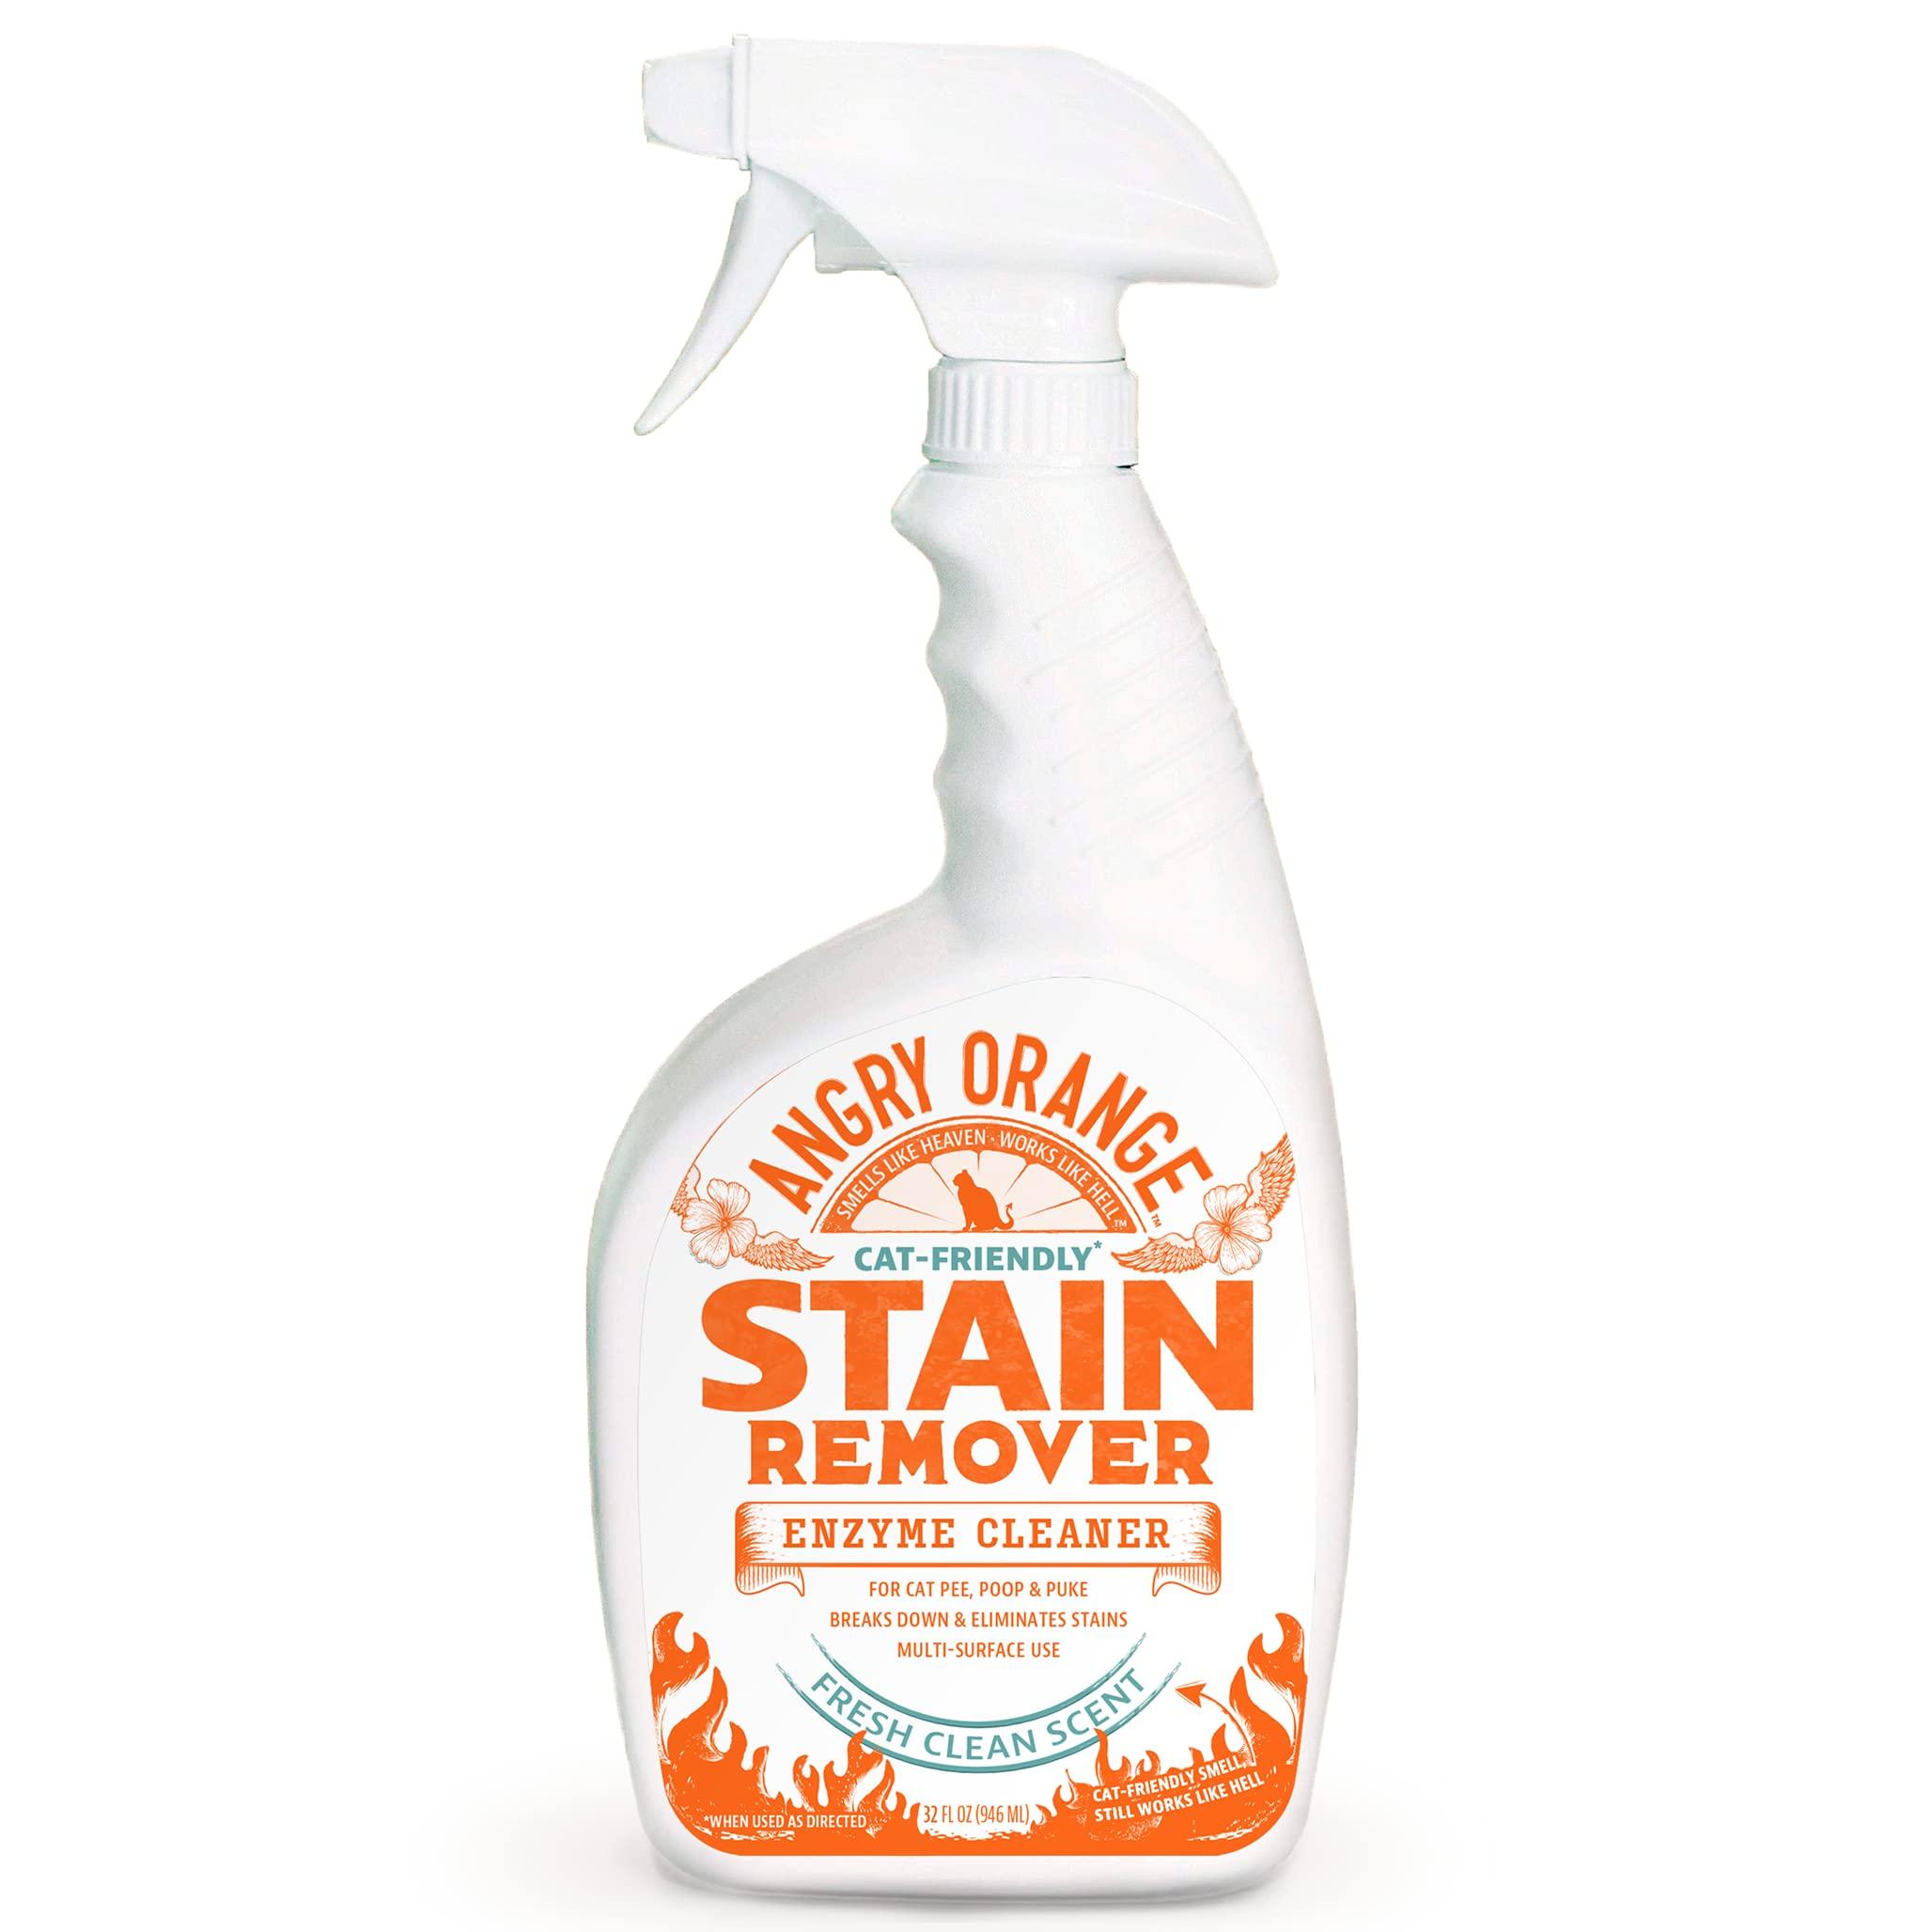 ANGRY ORANGE Cat Urine Odor Eliminator & Pet Stain Remover - Carpet Cleaner for Pets, Fresh Scented Cat Urine Deodorizing Spray and Enzyme Cleaner for Home Use